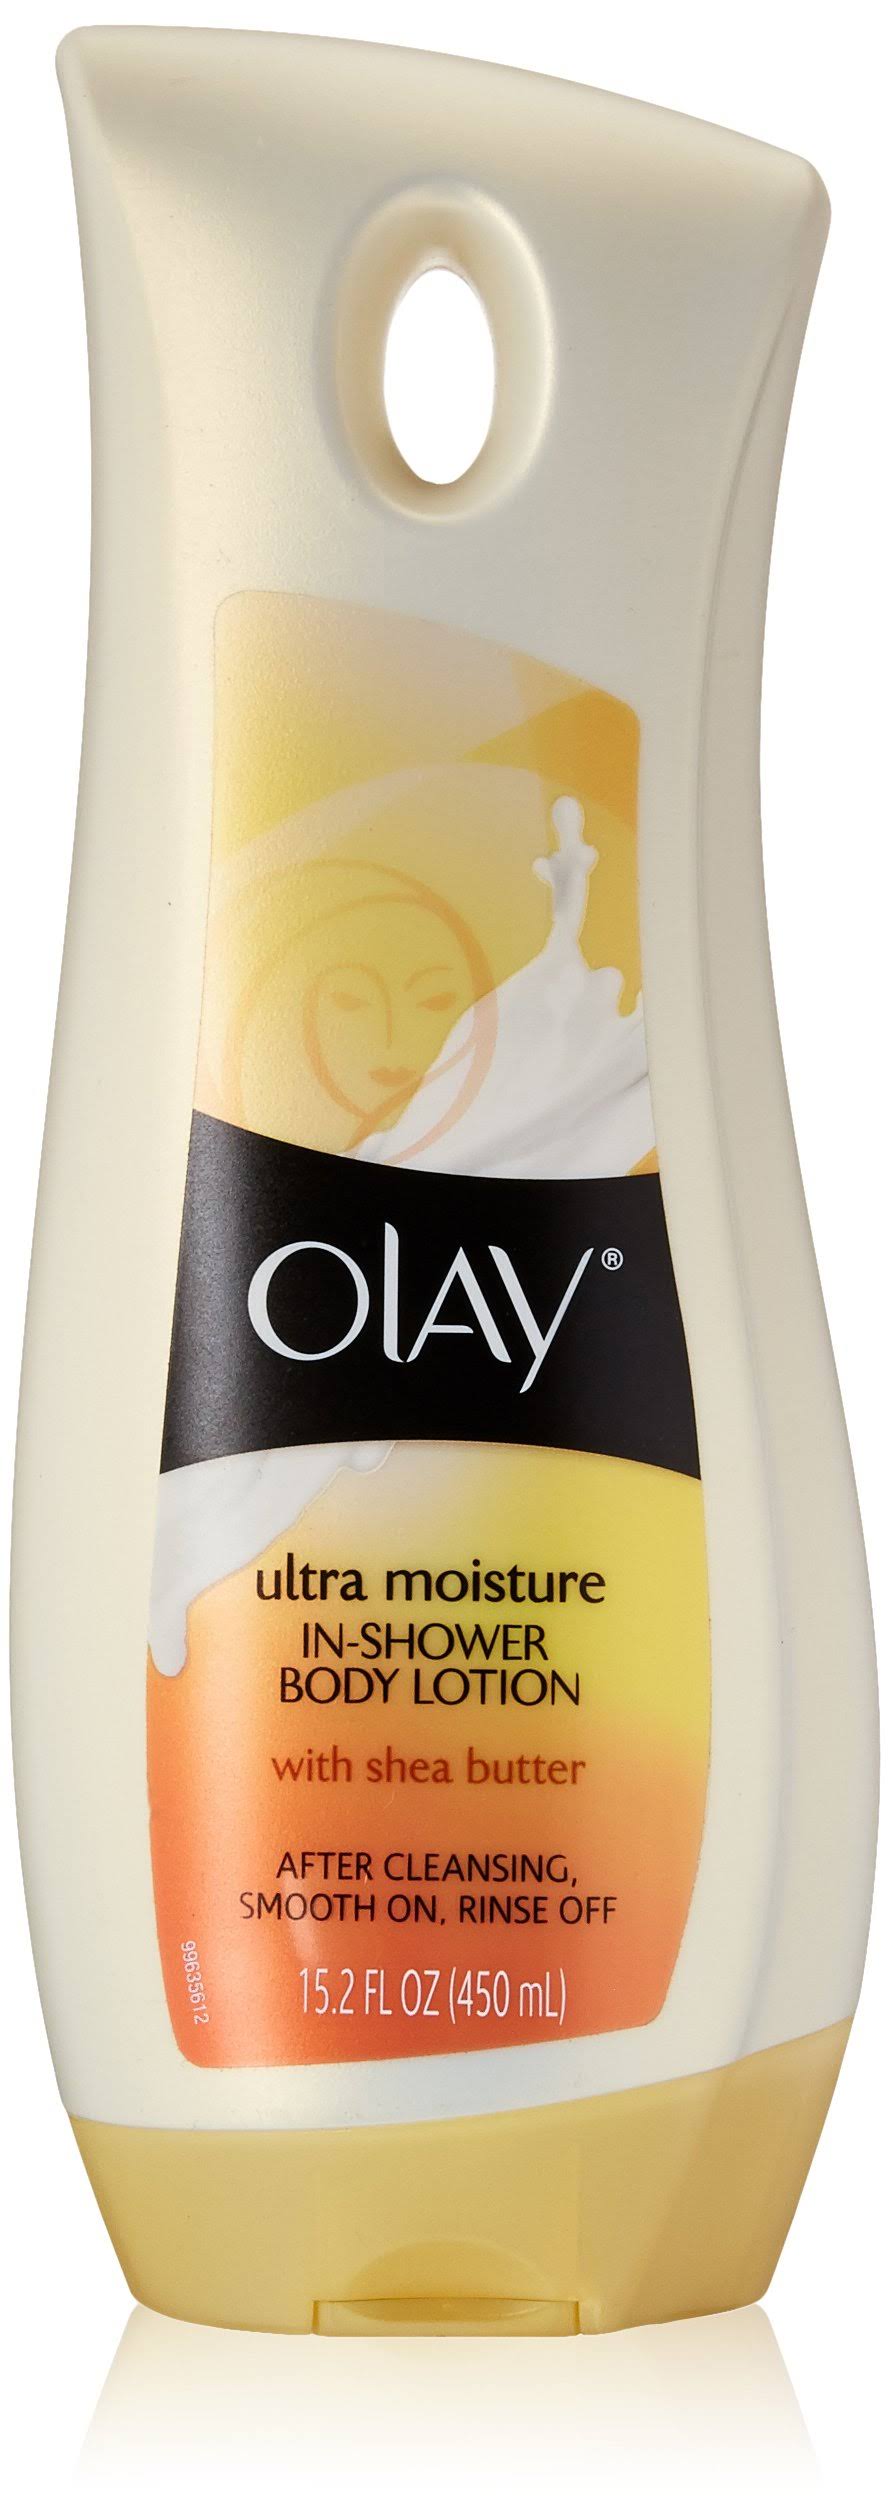 Olay Ultra Moisture In Shower Body Lotion - 15.2oz